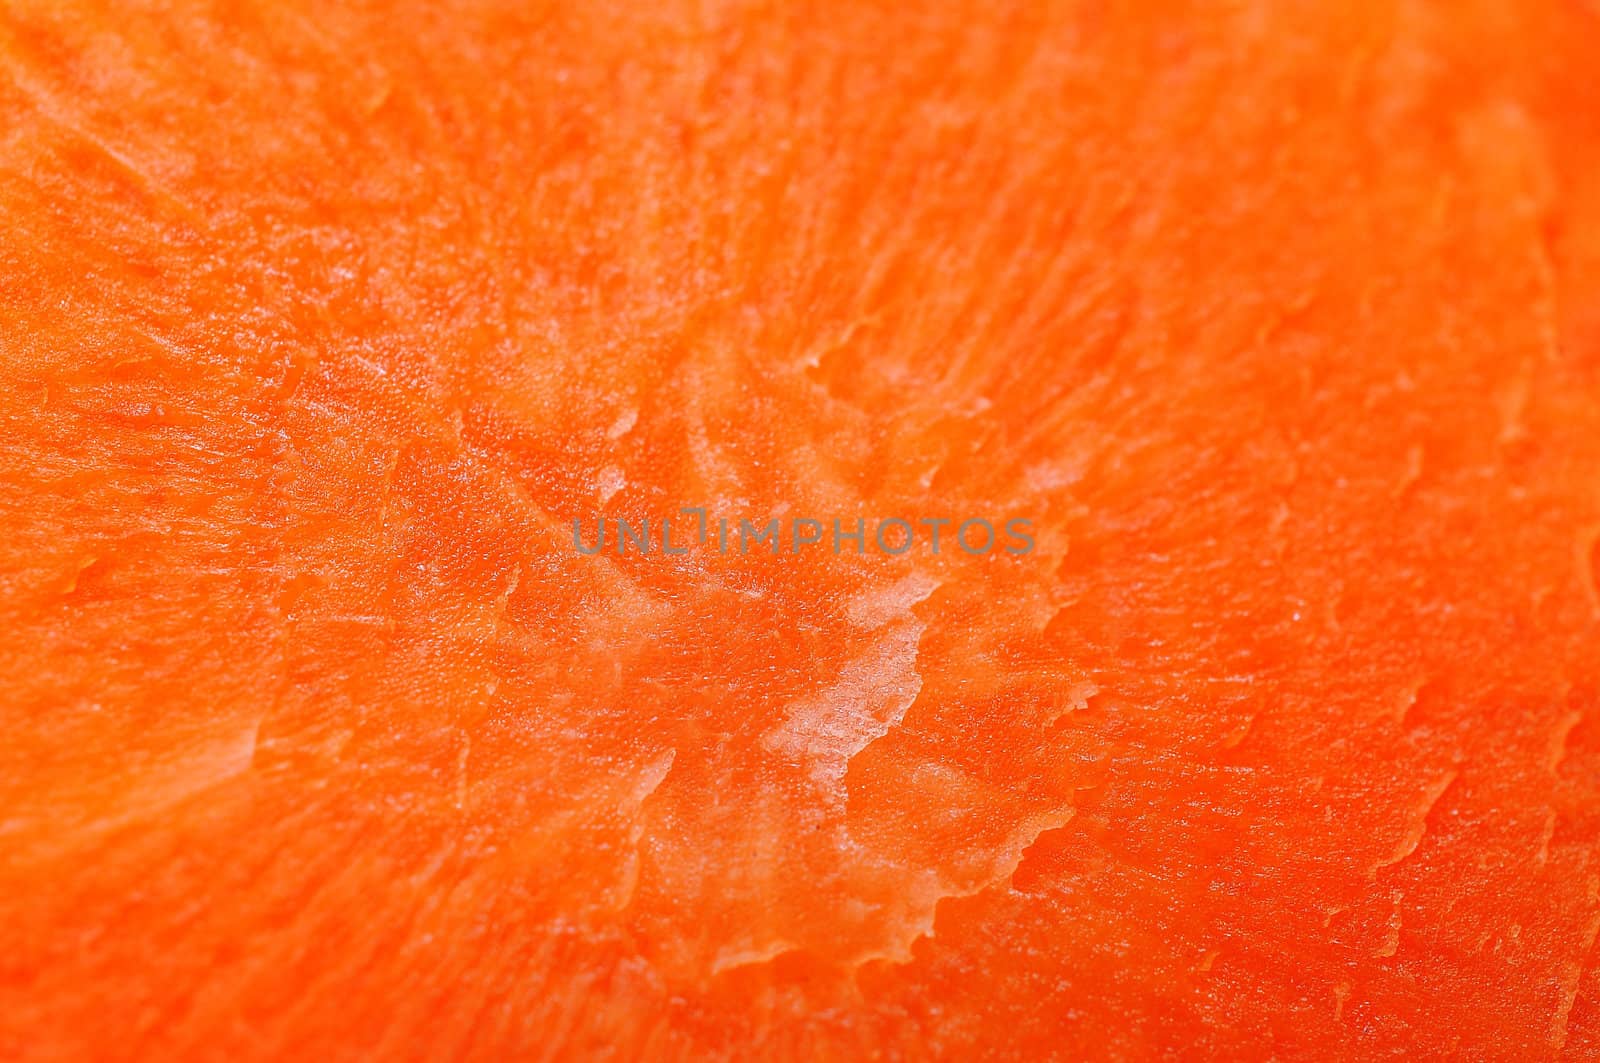 Carrot cut shows of pattern detail. by sayhmog